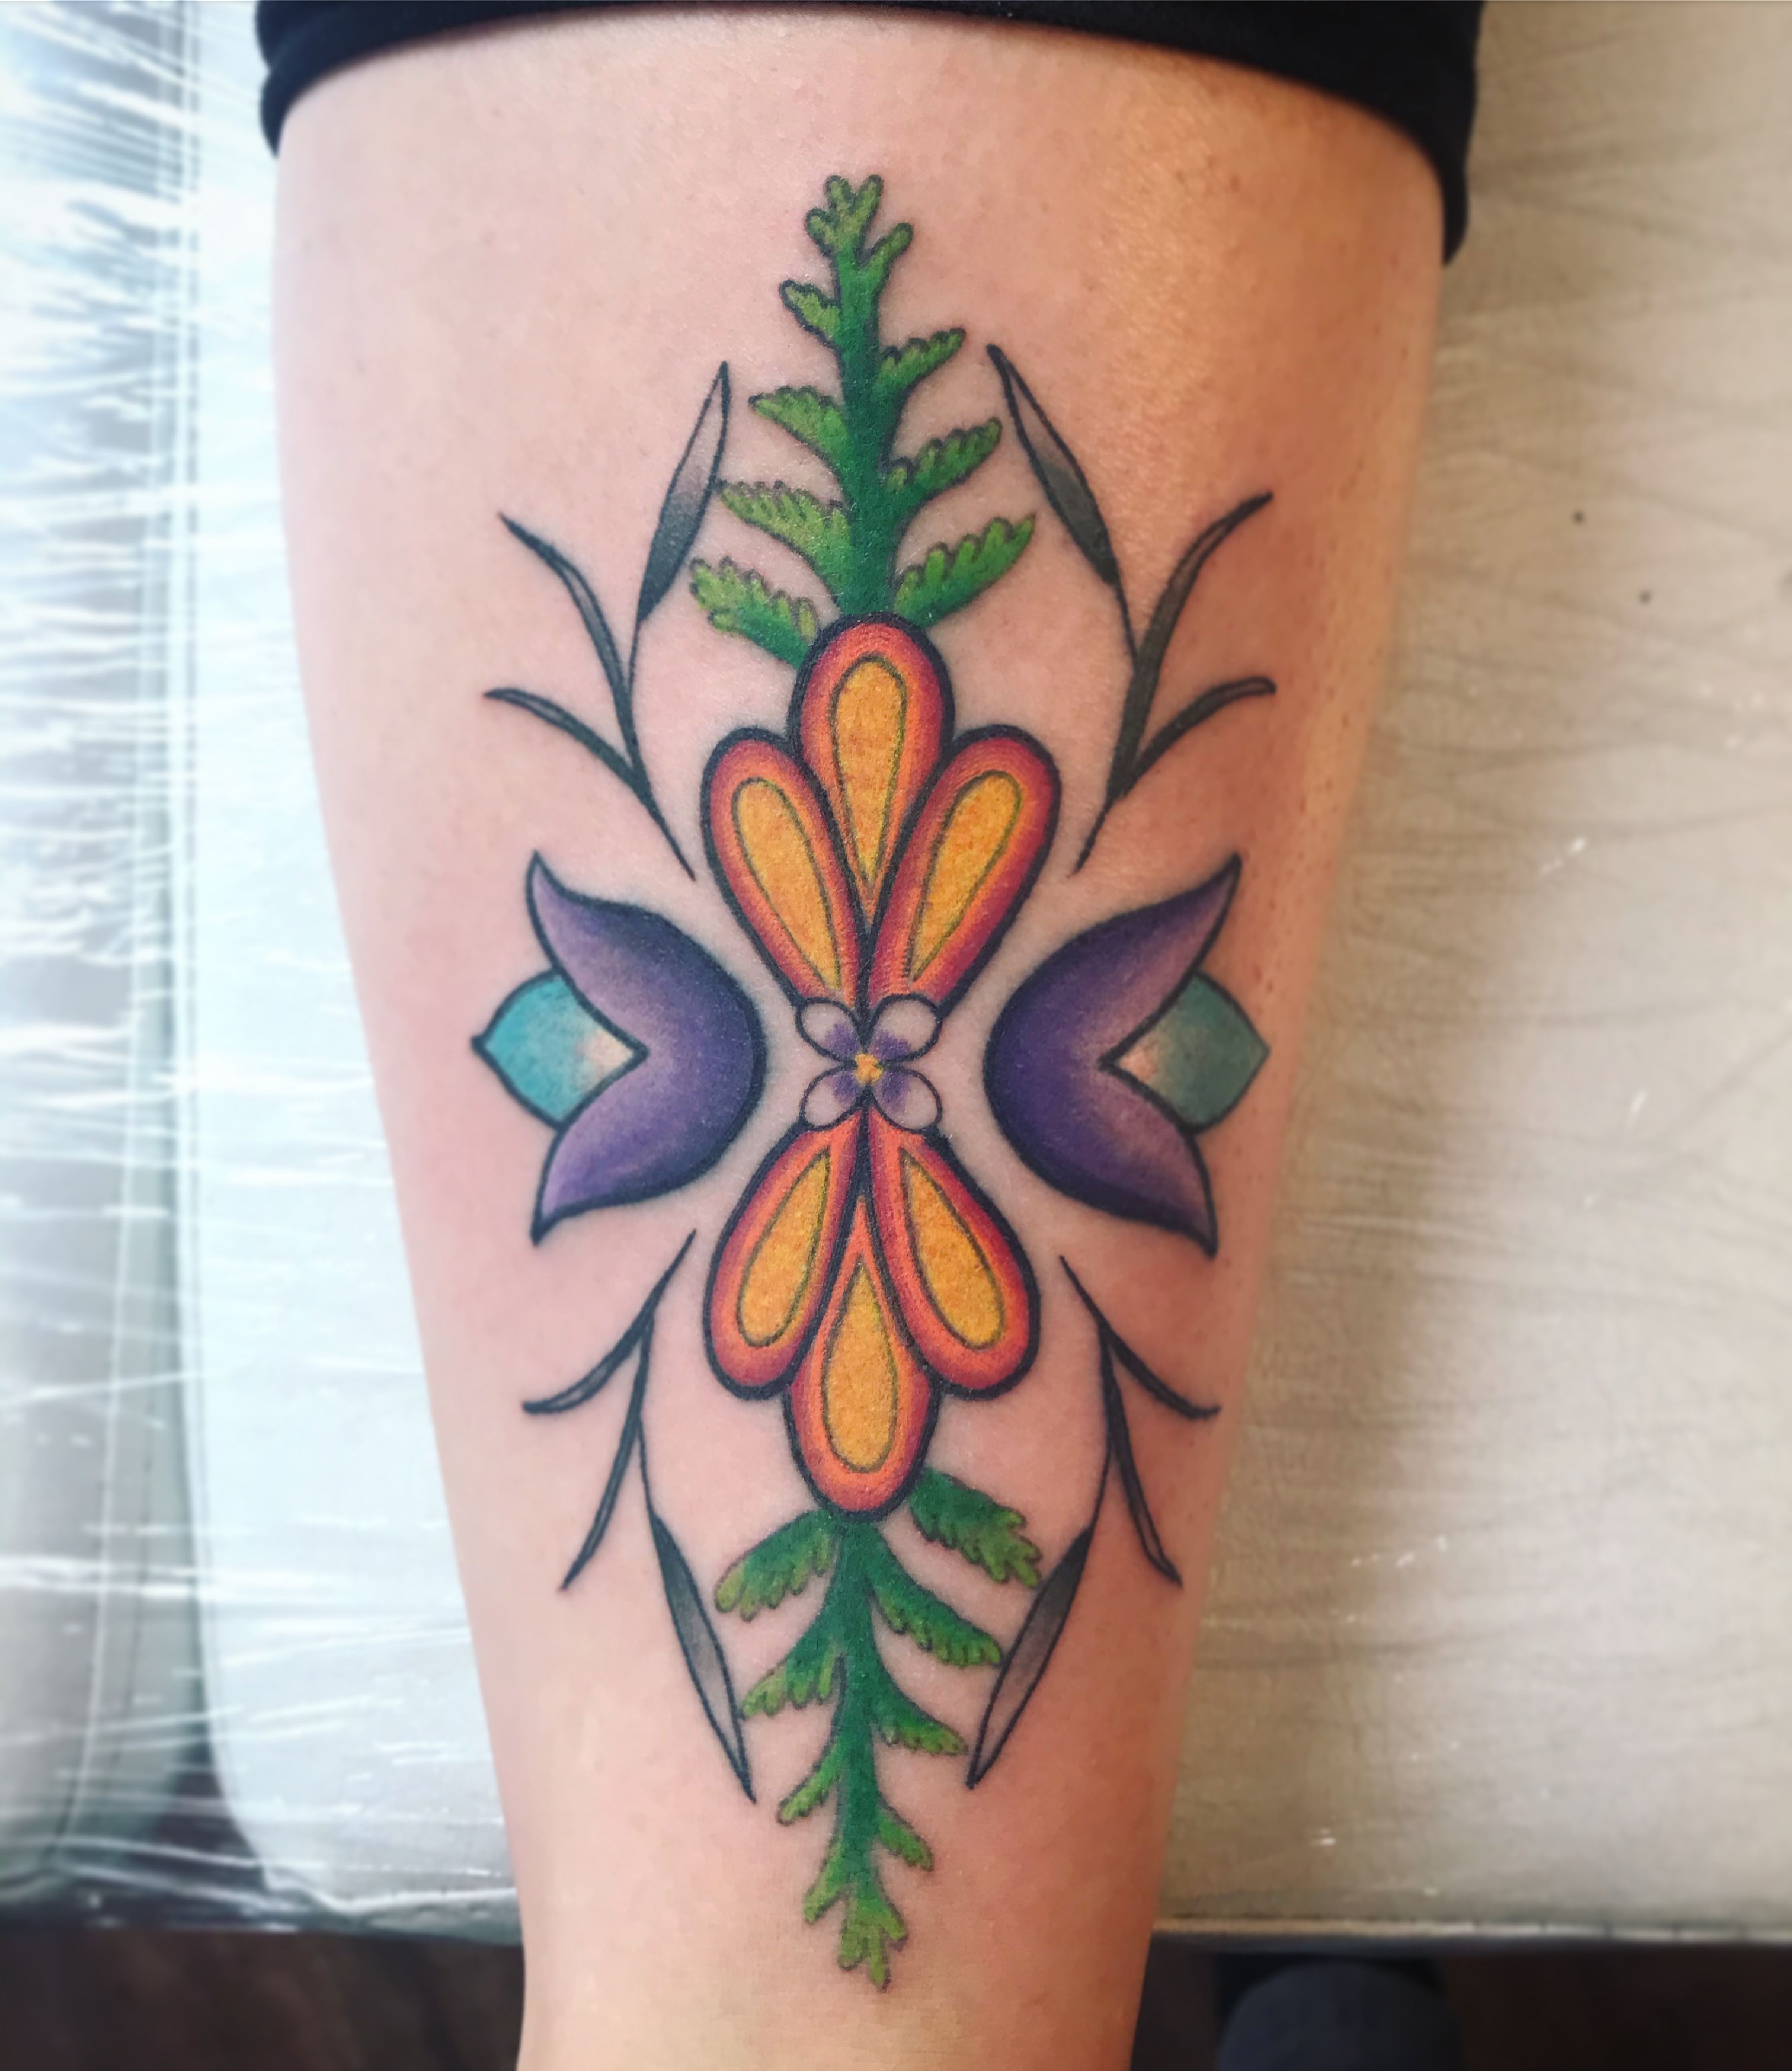 IndigenousXca Archived on Twitter Gizhiiwe is an Anishinaabe tattoo  artist of Ojibwe and Australian descent Based in Montreal she has been  tattooing for 10 years She also does llustration and bead work